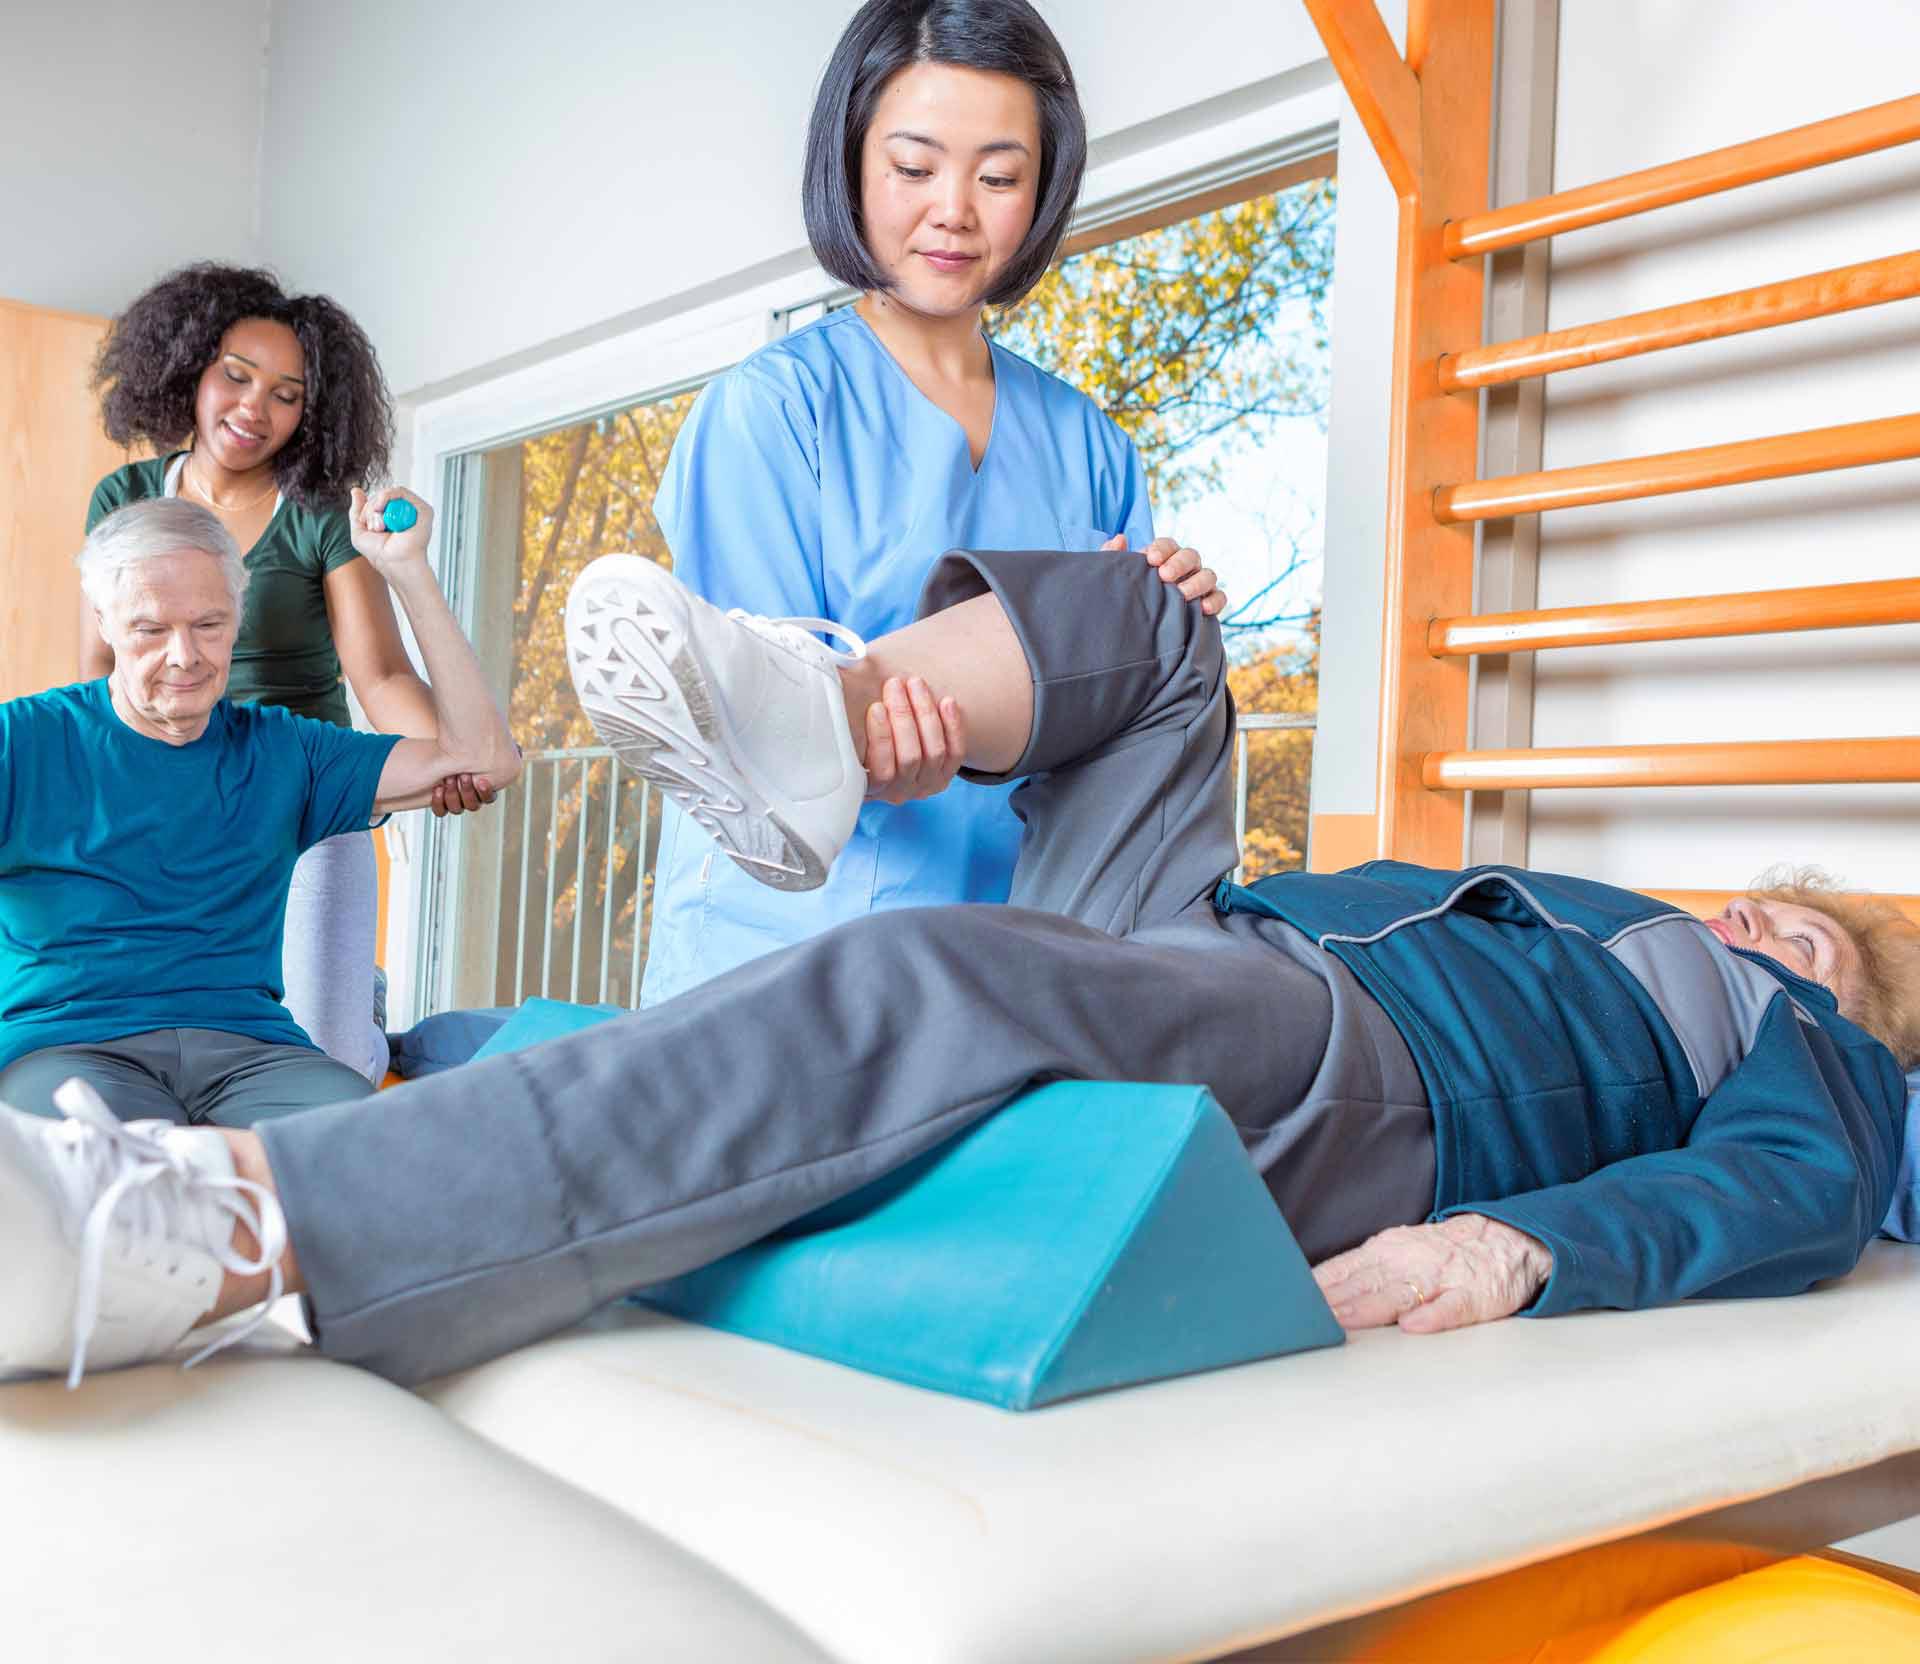 Hip Pain Relief, Somerset, NJ - Comprehensive Orthopedic Physical Therapy